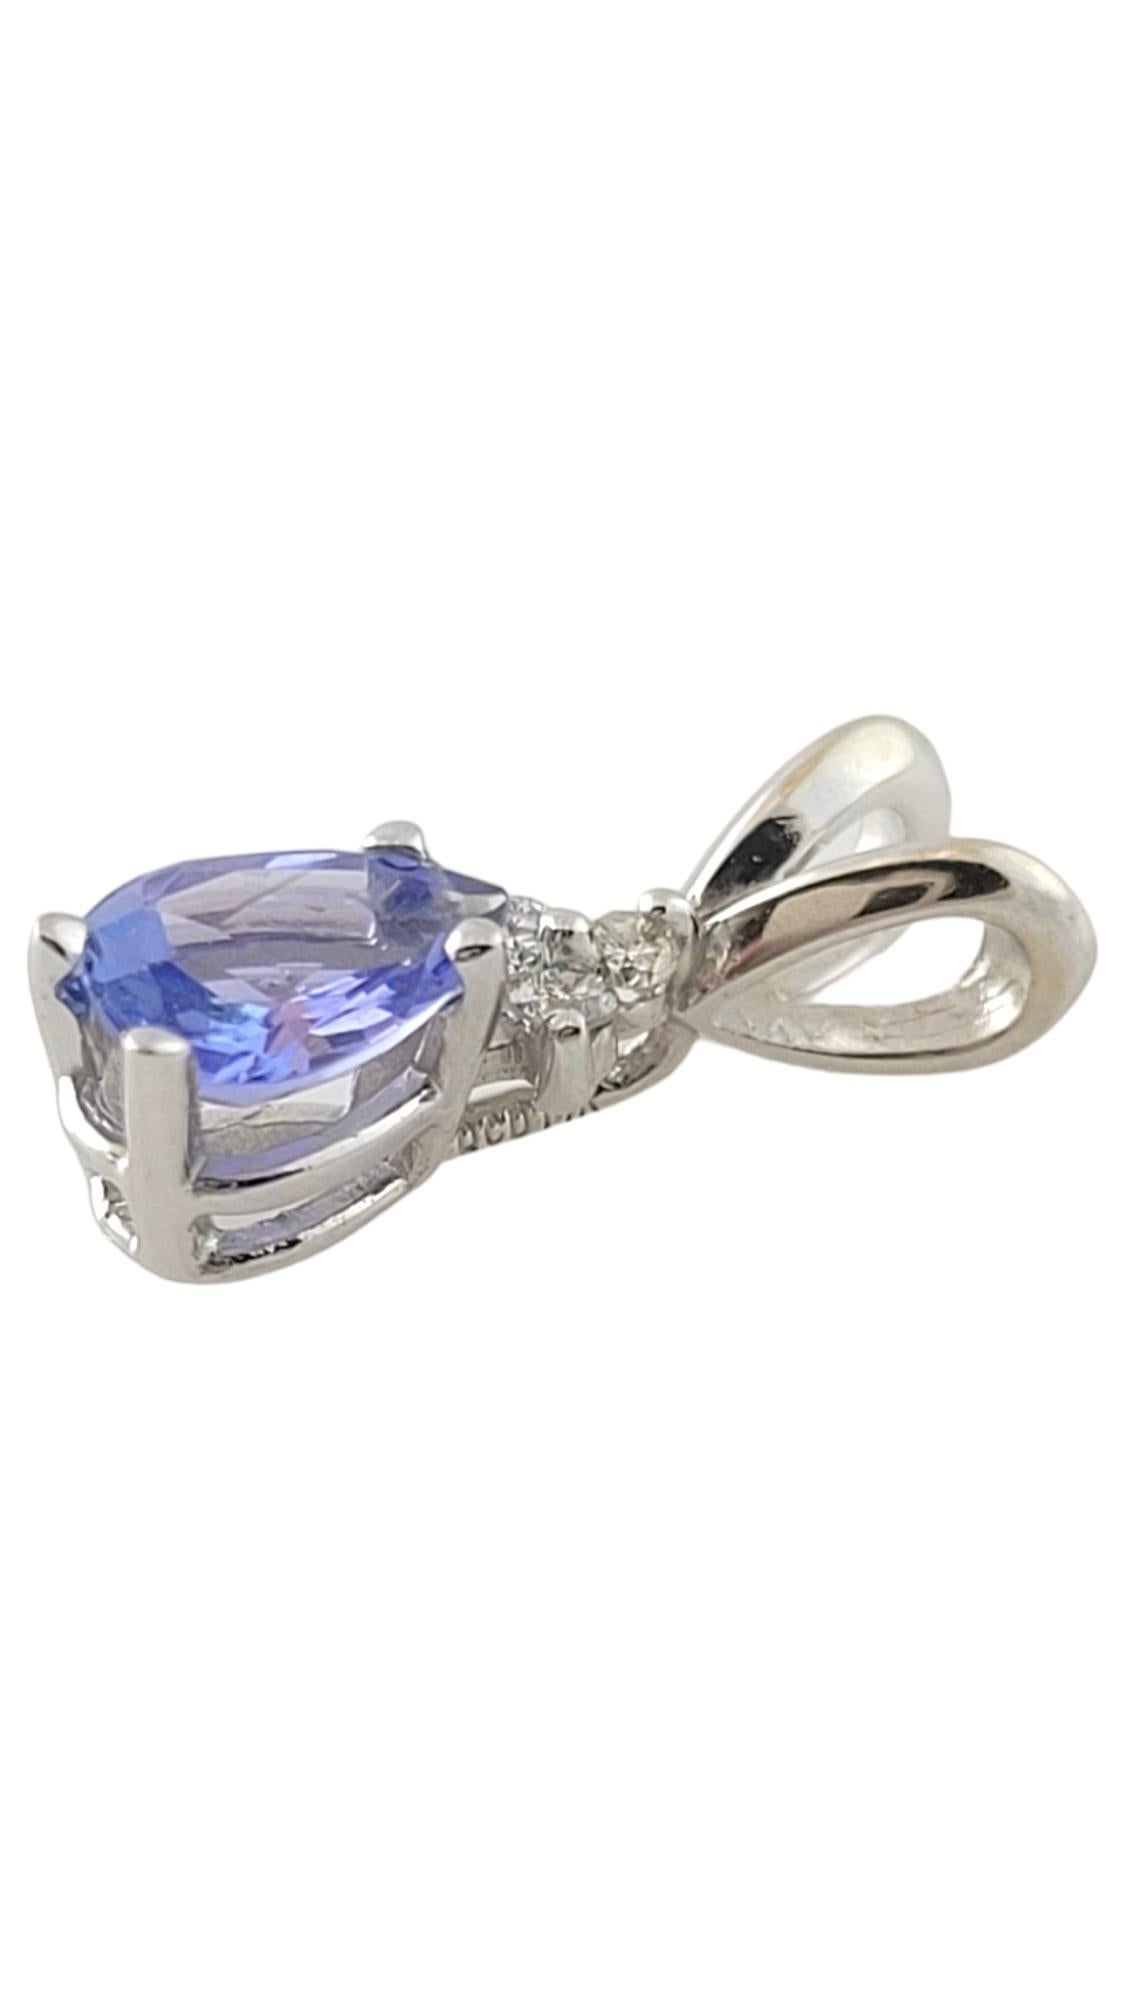 Vintage 14K White Gold Tanzanite & Diamond Pendant

This beautiful 14K gold pendant features a stunning lab tested tanzanite stone paired with 3 round brilliant cut diamonds!

Approximate total diamond weight: 0.4 dwt/ 0.6 g

Diamond color: